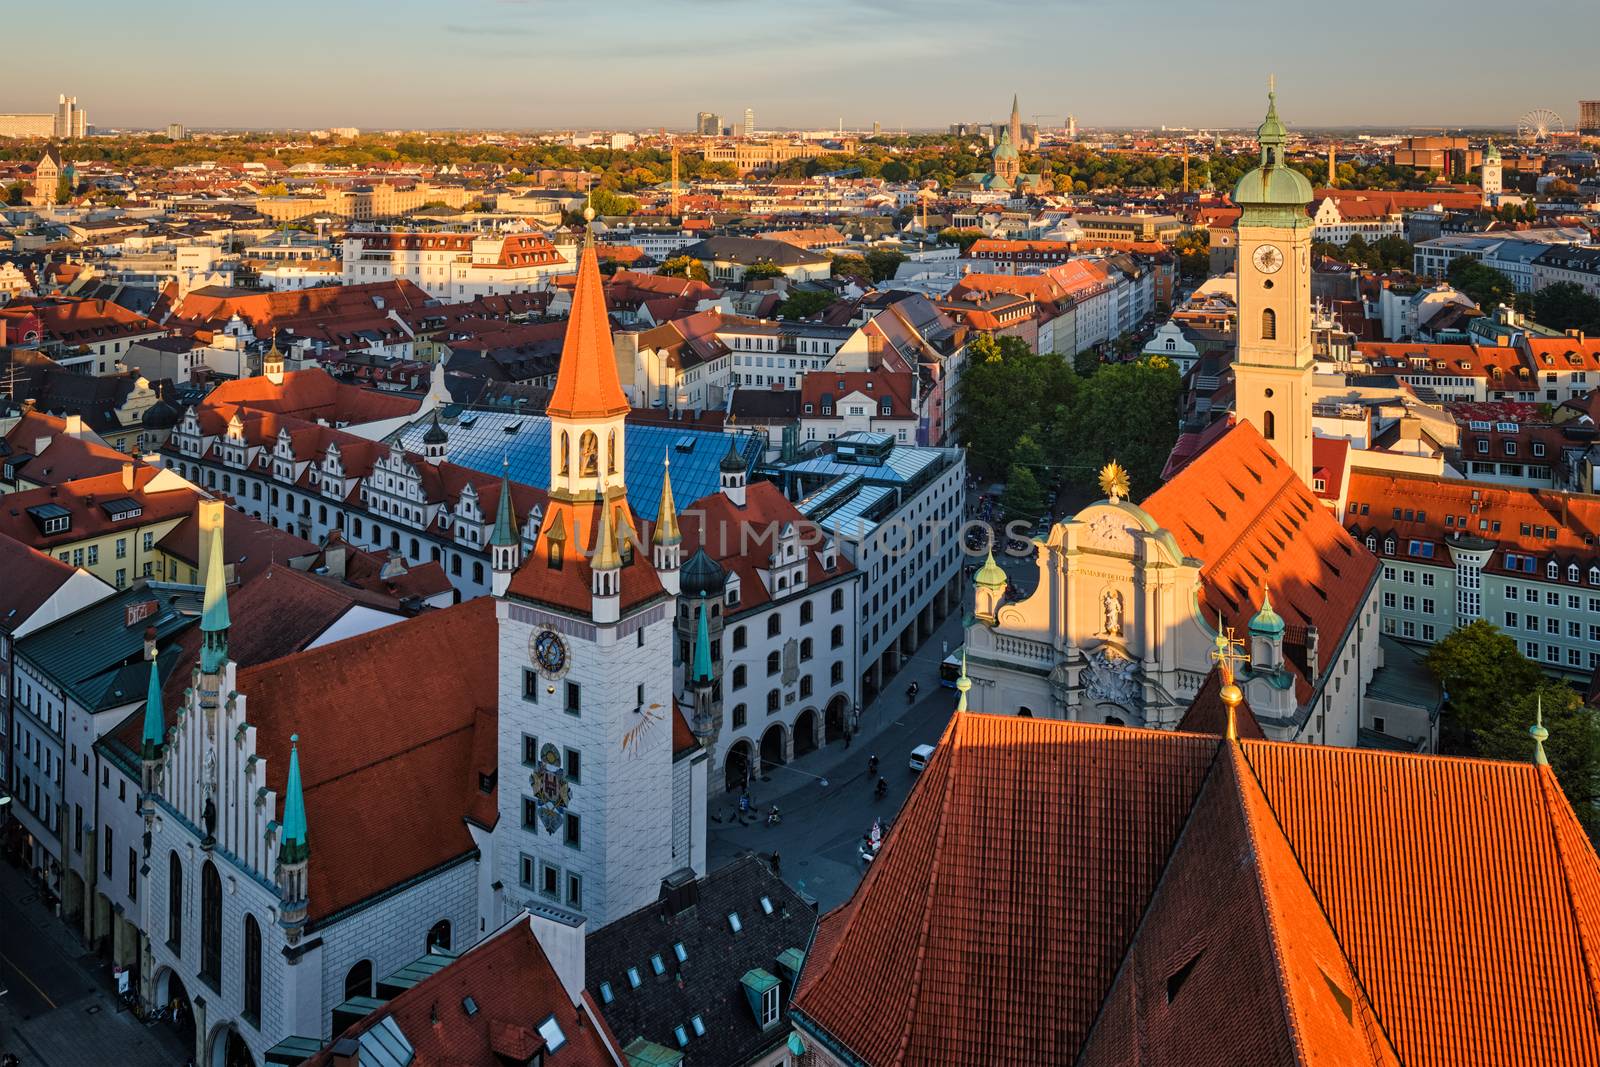 Aerial view of Munich - Marienplatz and Altes Rathaus from St. Peter's church on sunset. Munich, Germany